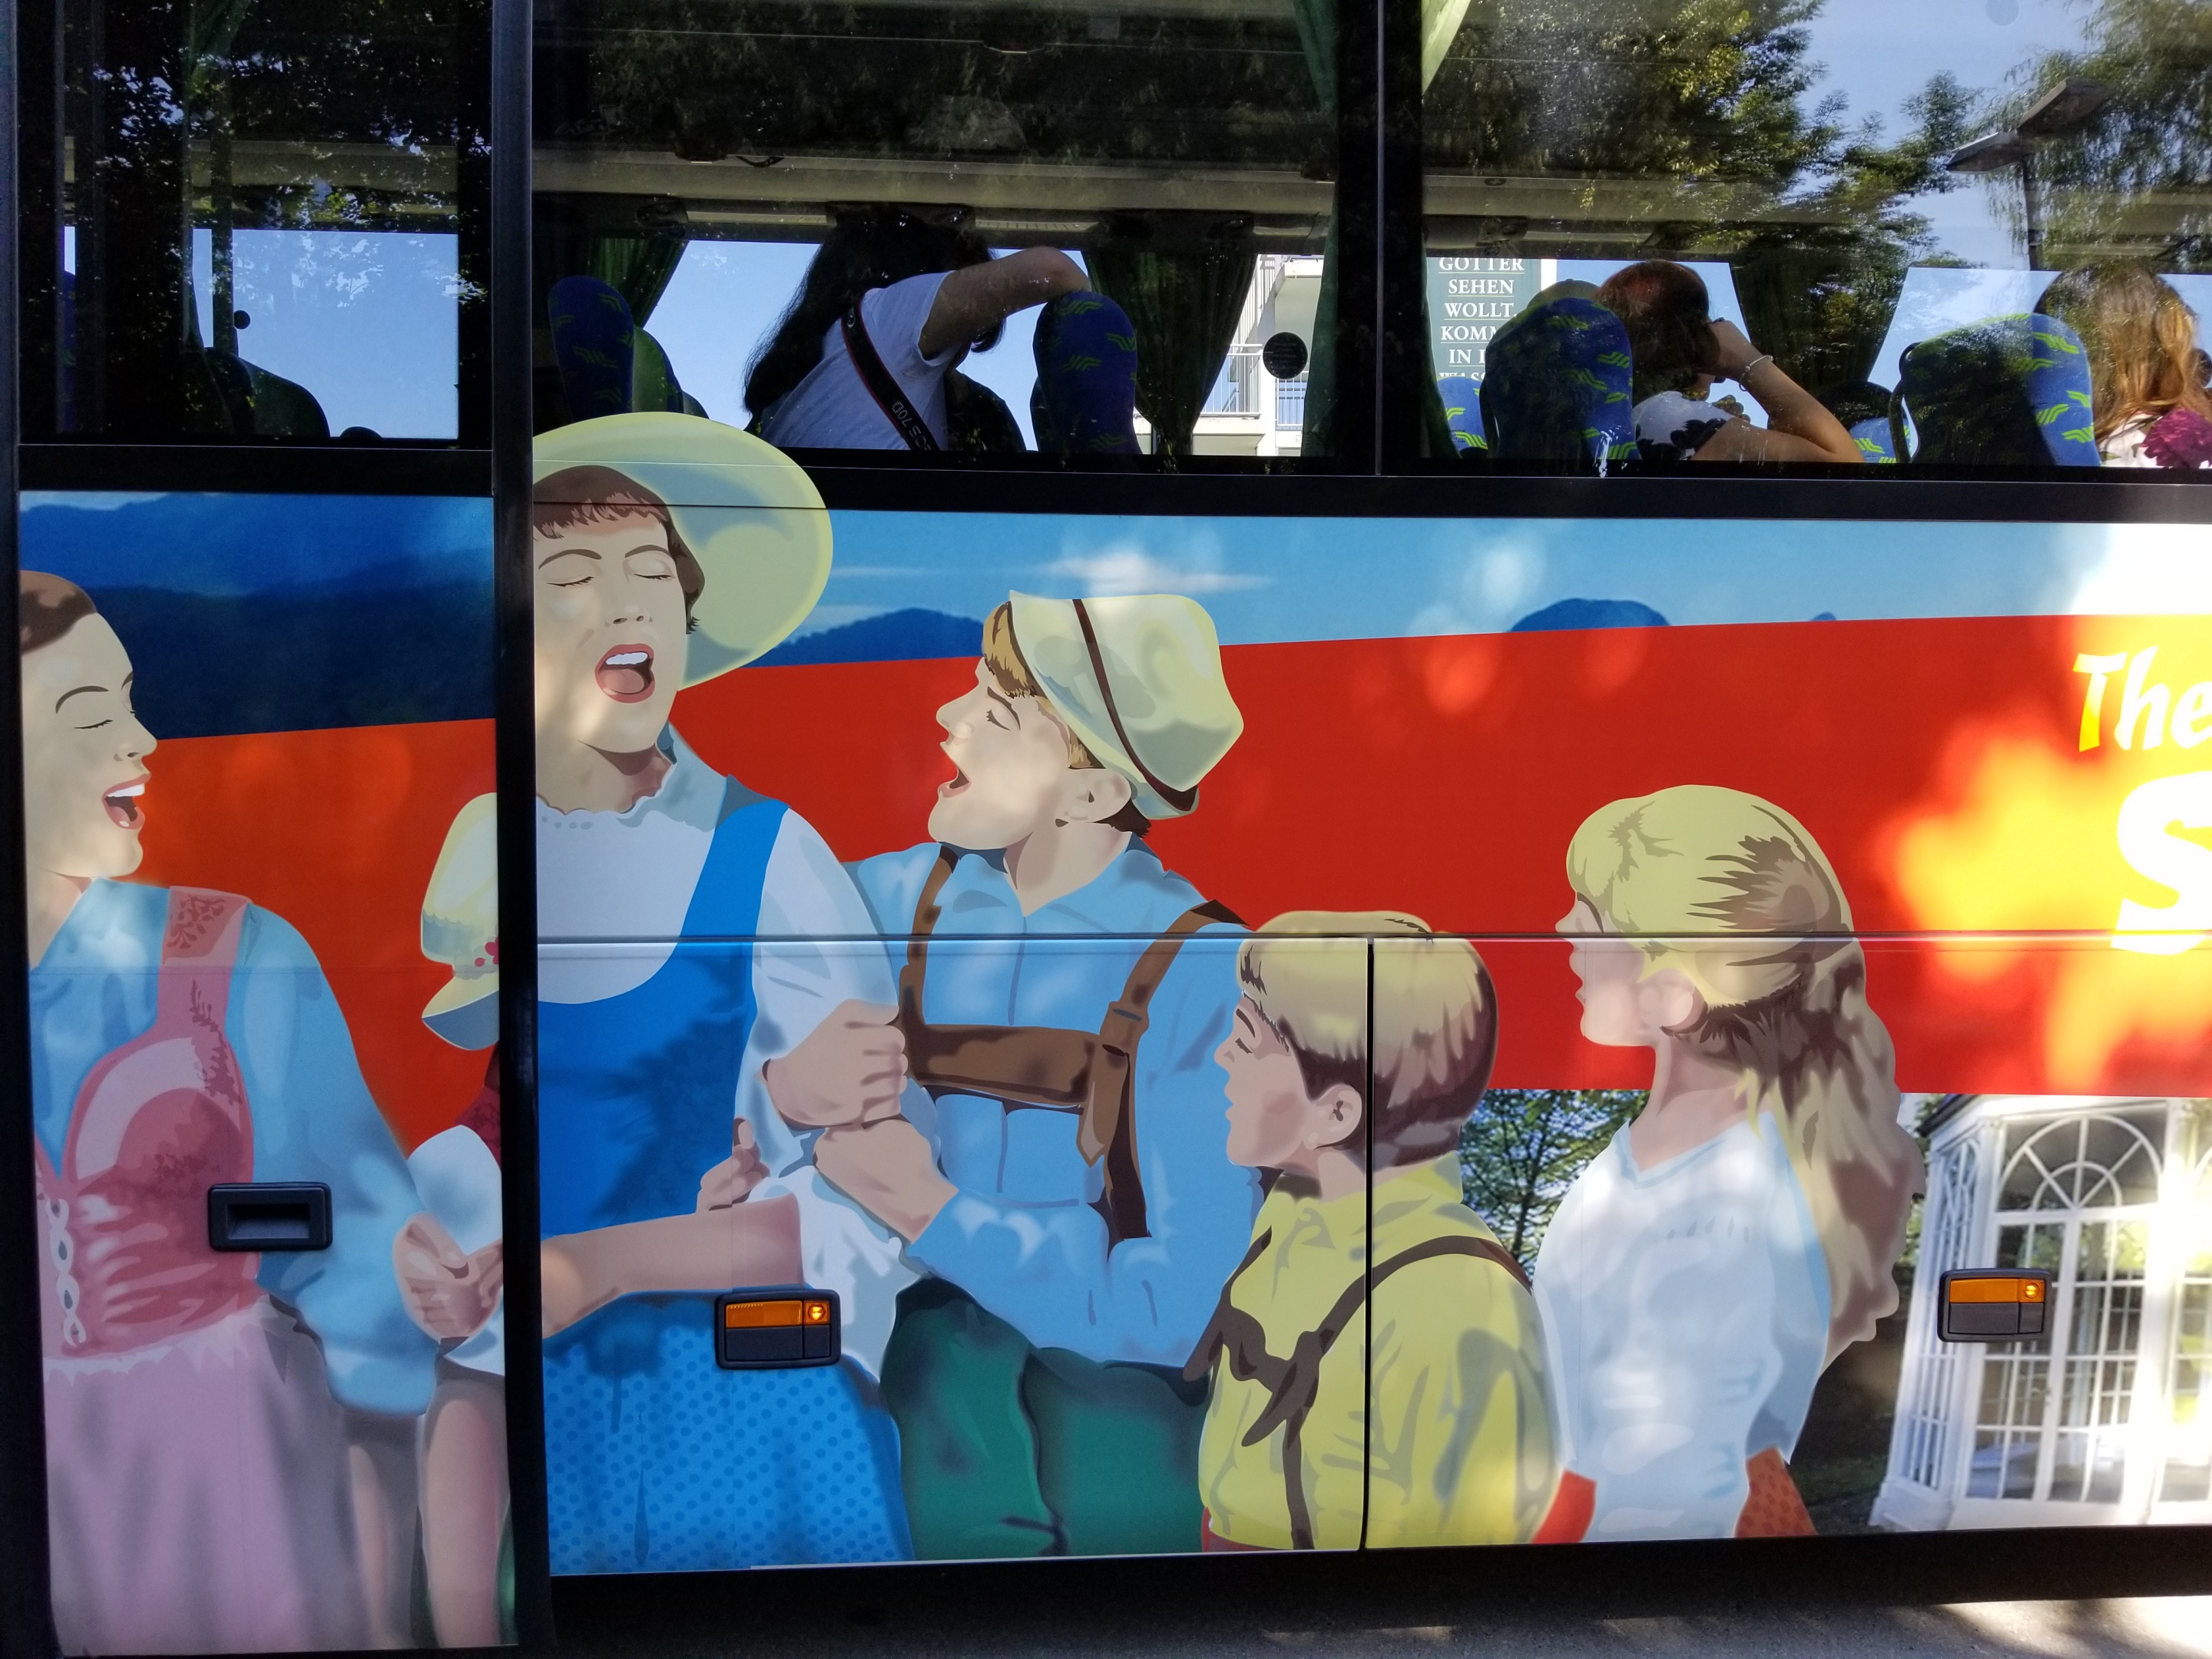 Panorama Bus Tours "Sound of Music" decorated bus.